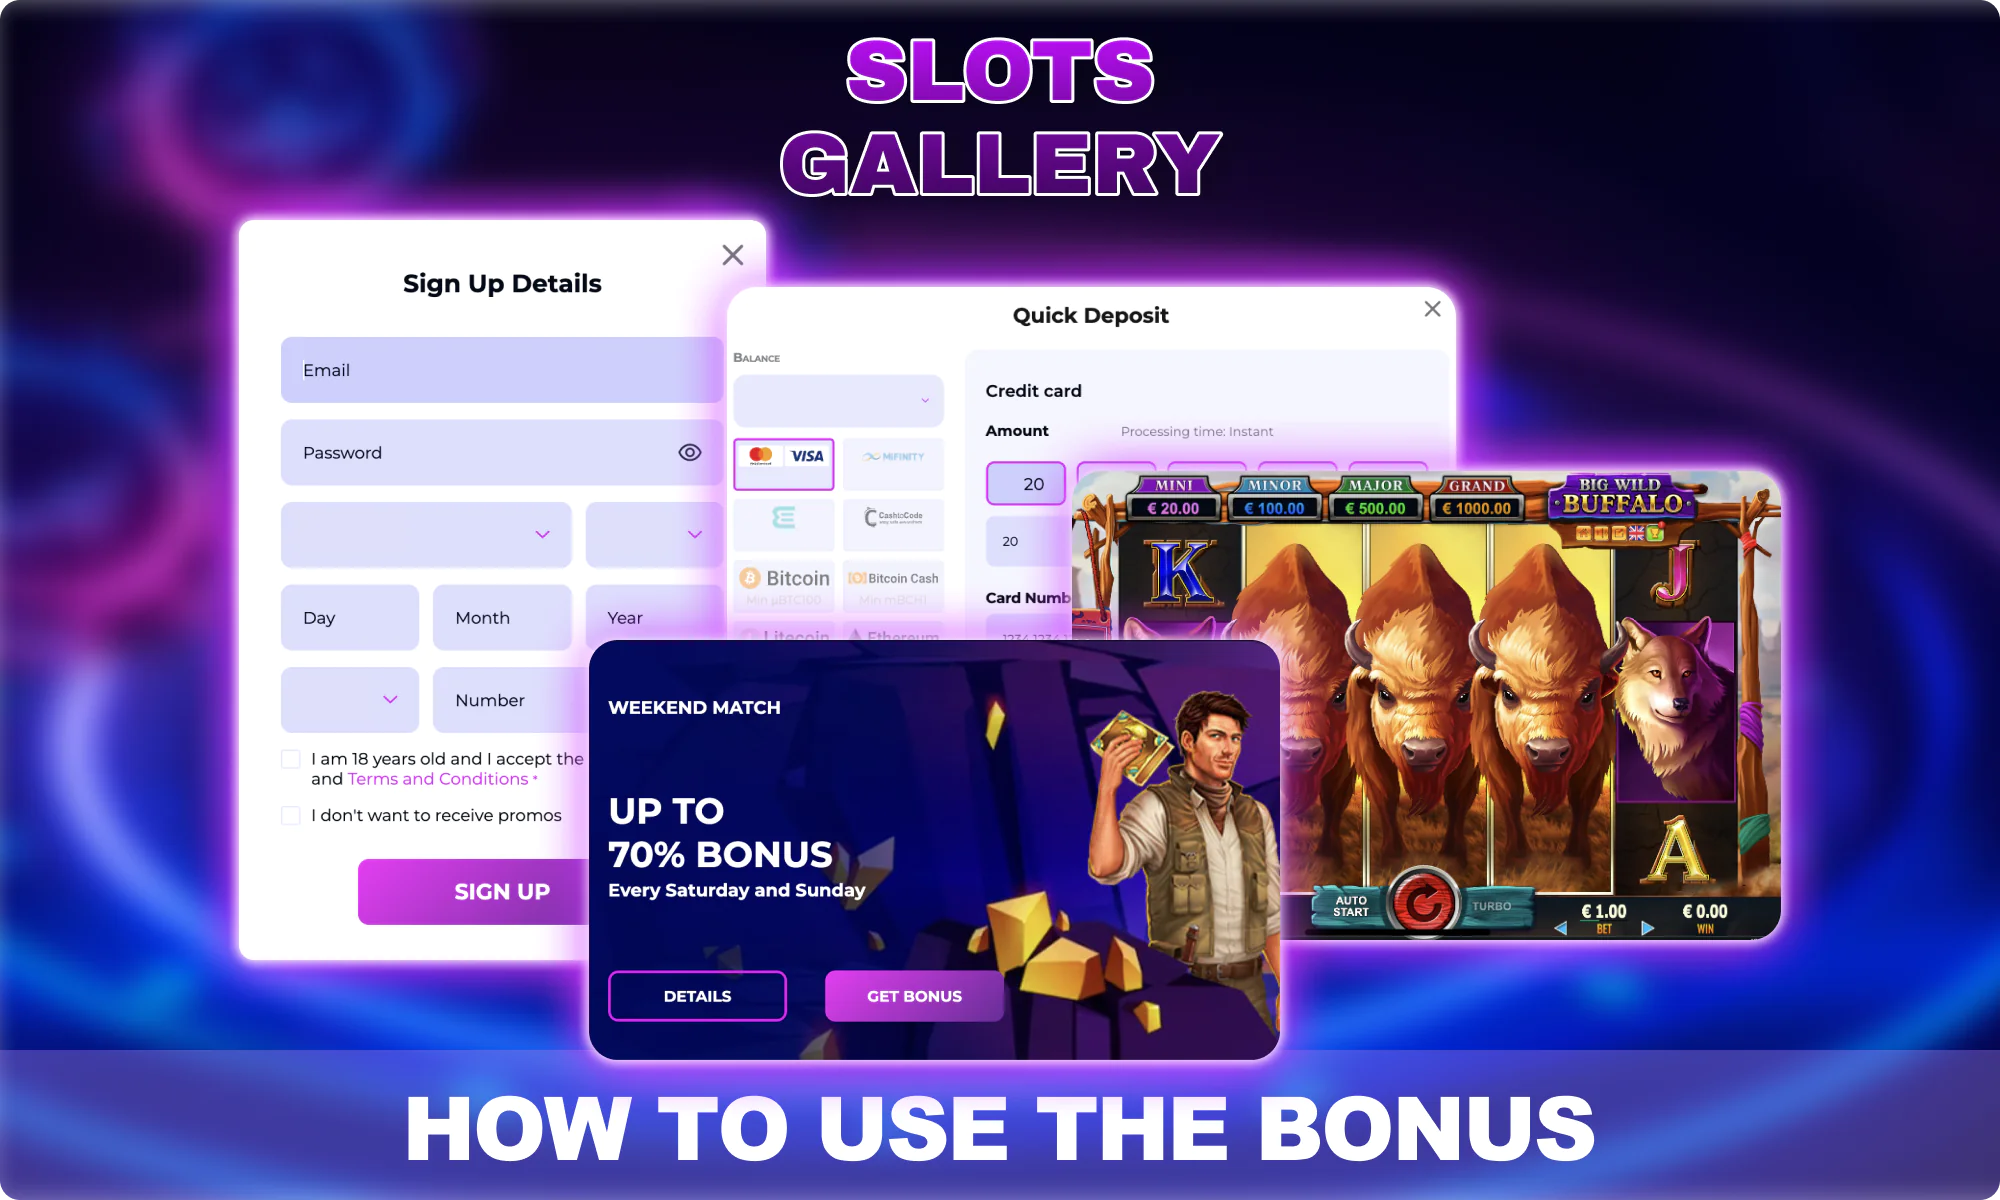 Slots Gallery New Zealand - How to use bonus offers